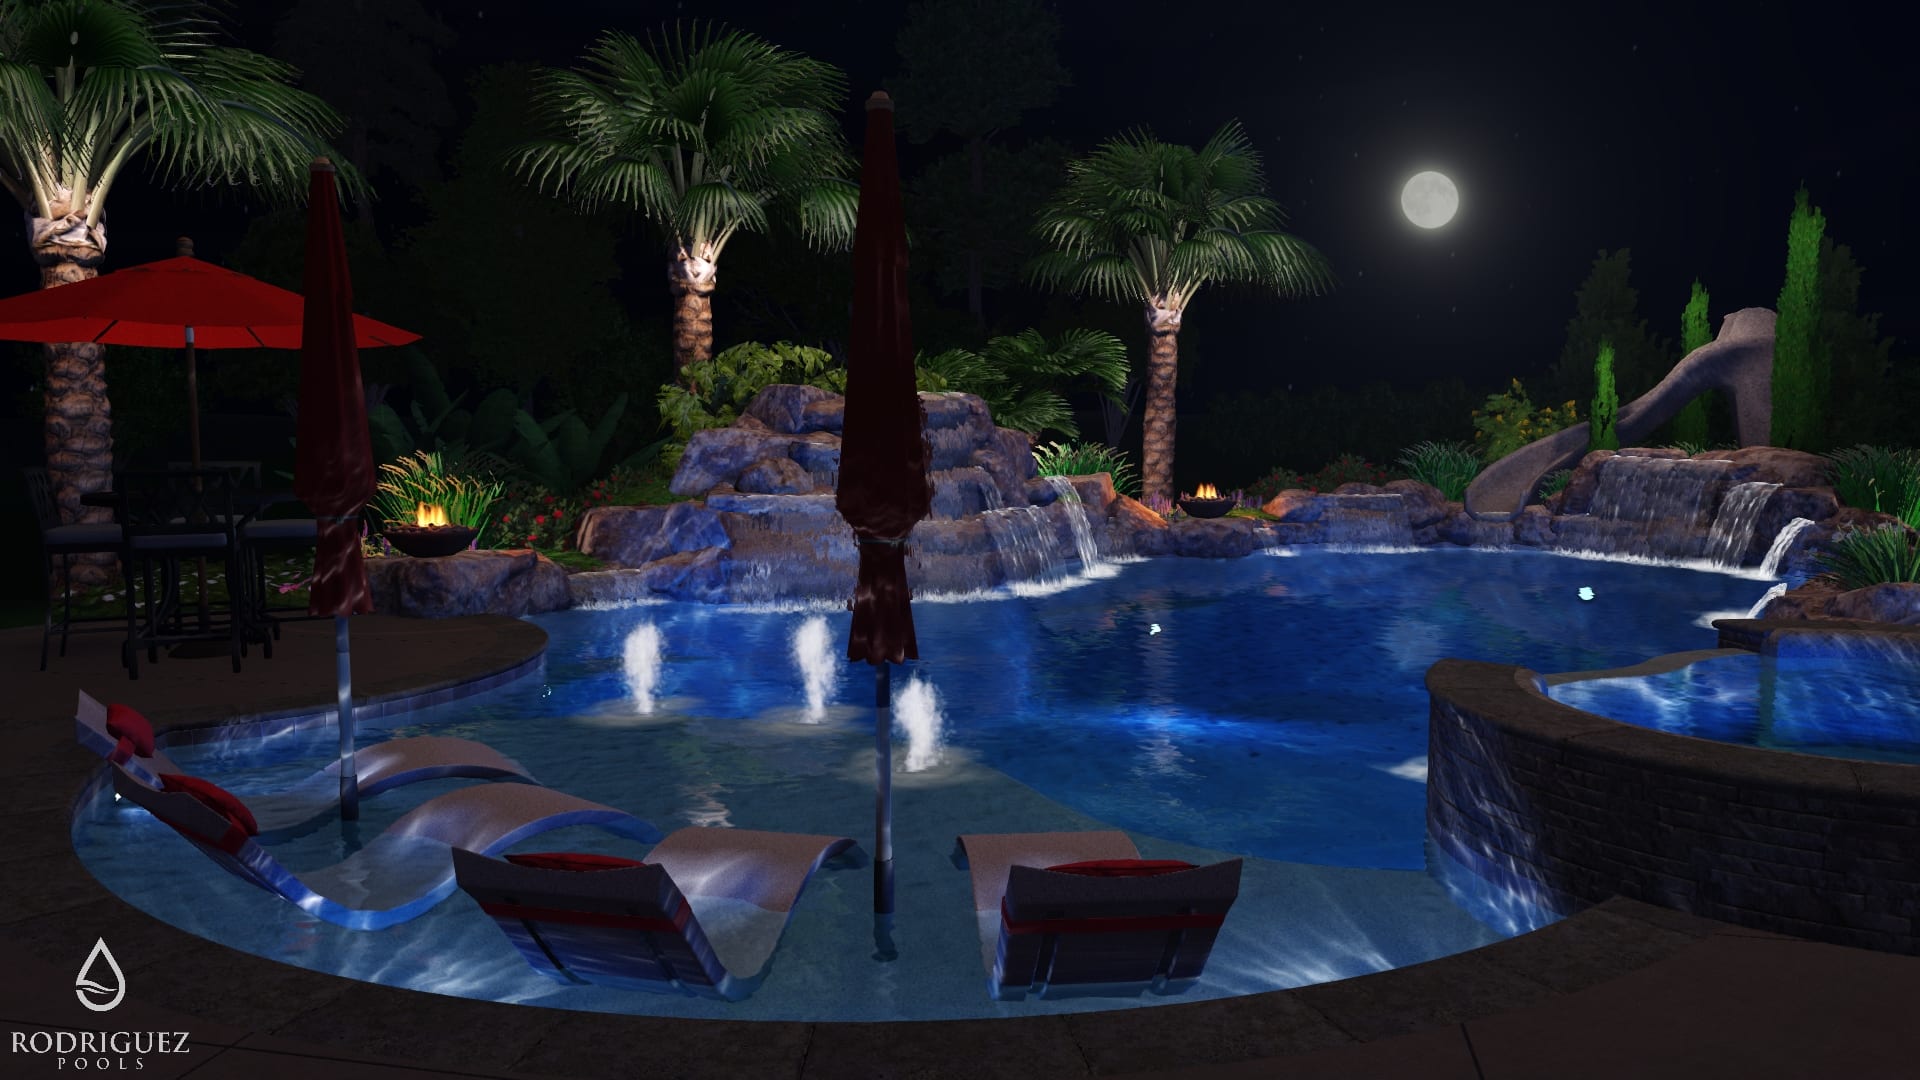 A pool with a waterfall and trees at night.